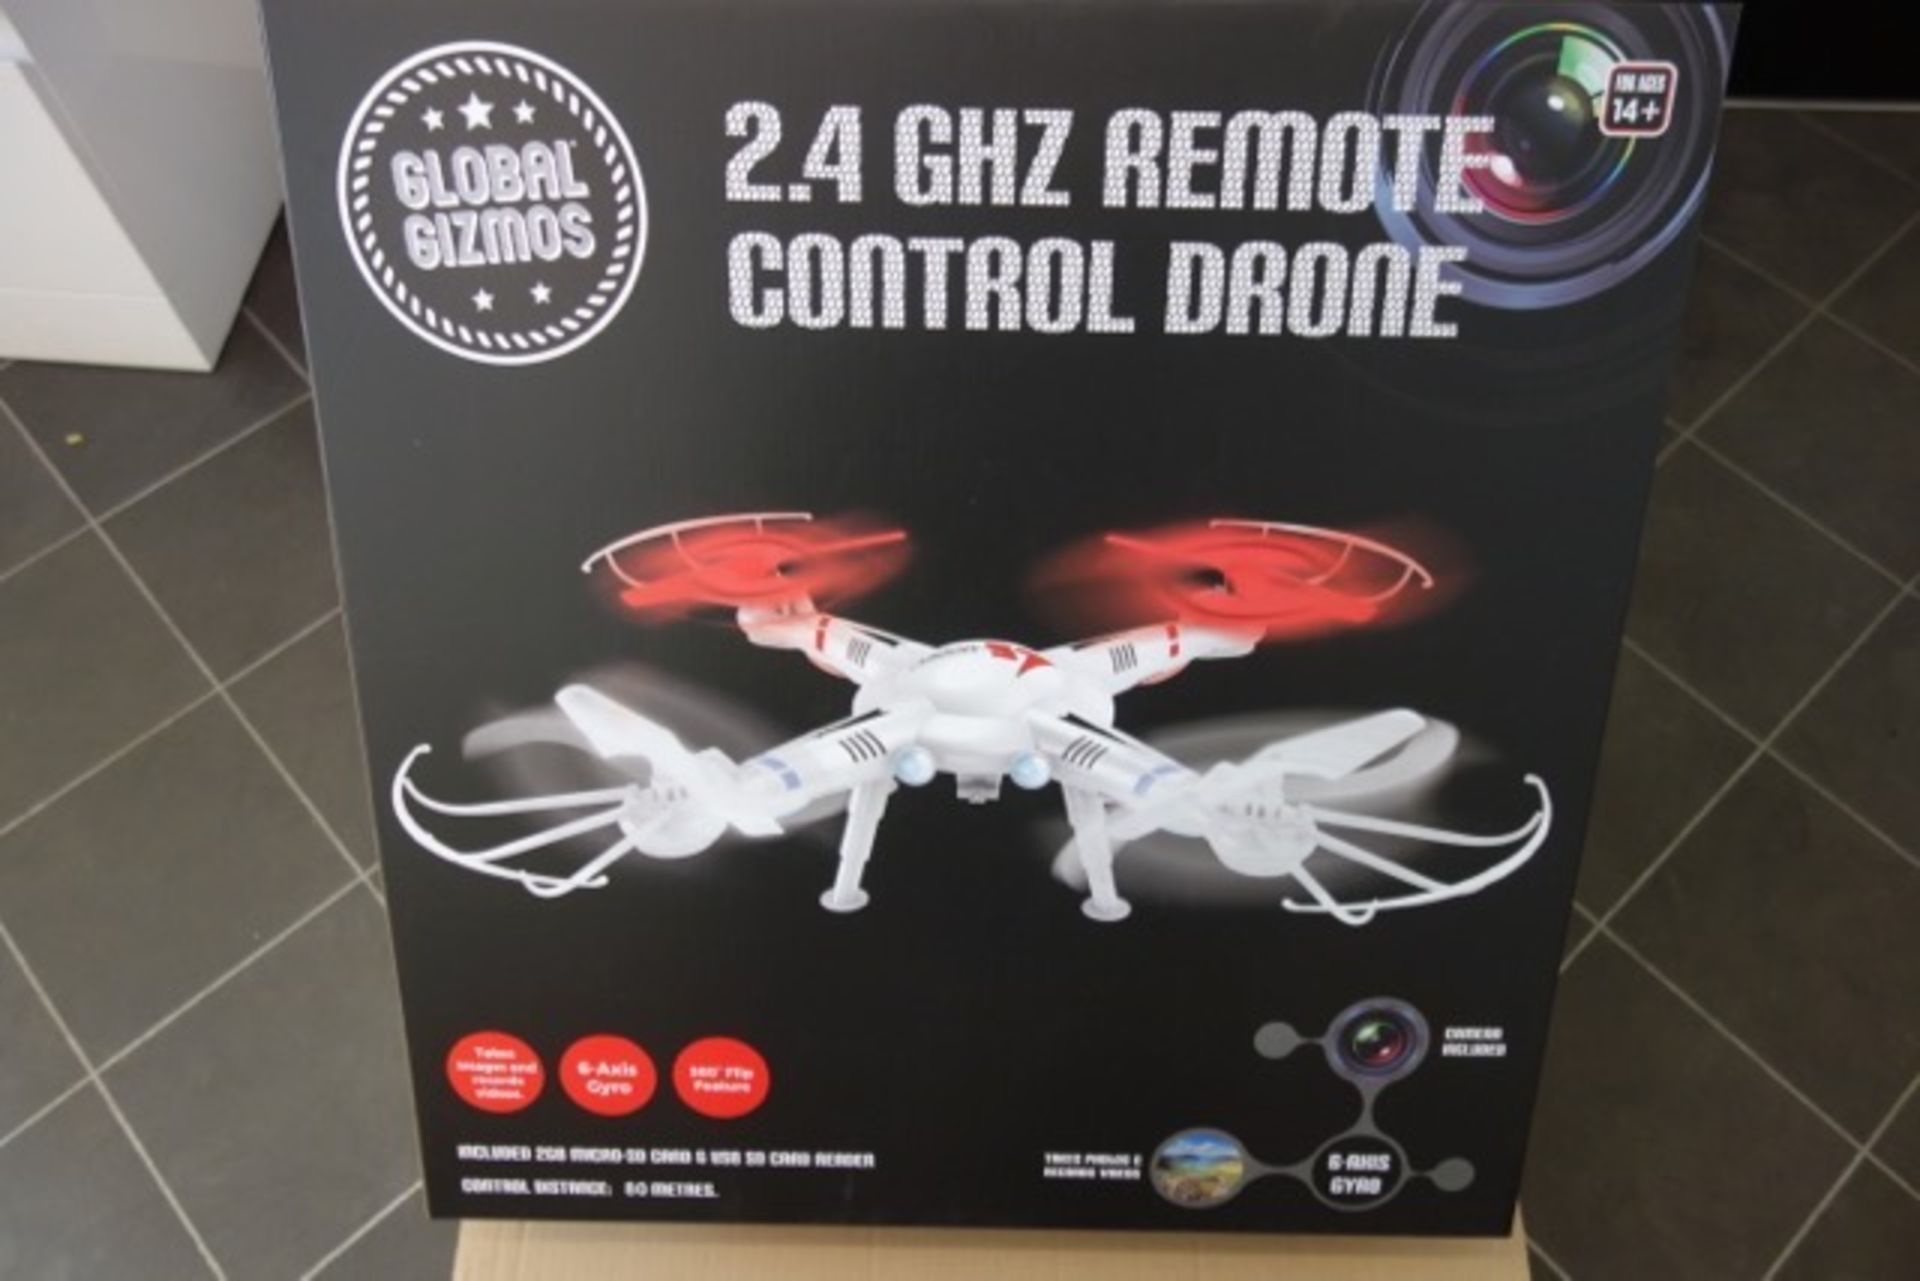 4 x Brand New Global Gizmos 2.4GHZ Remote Control Drone. - Image 2 of 4